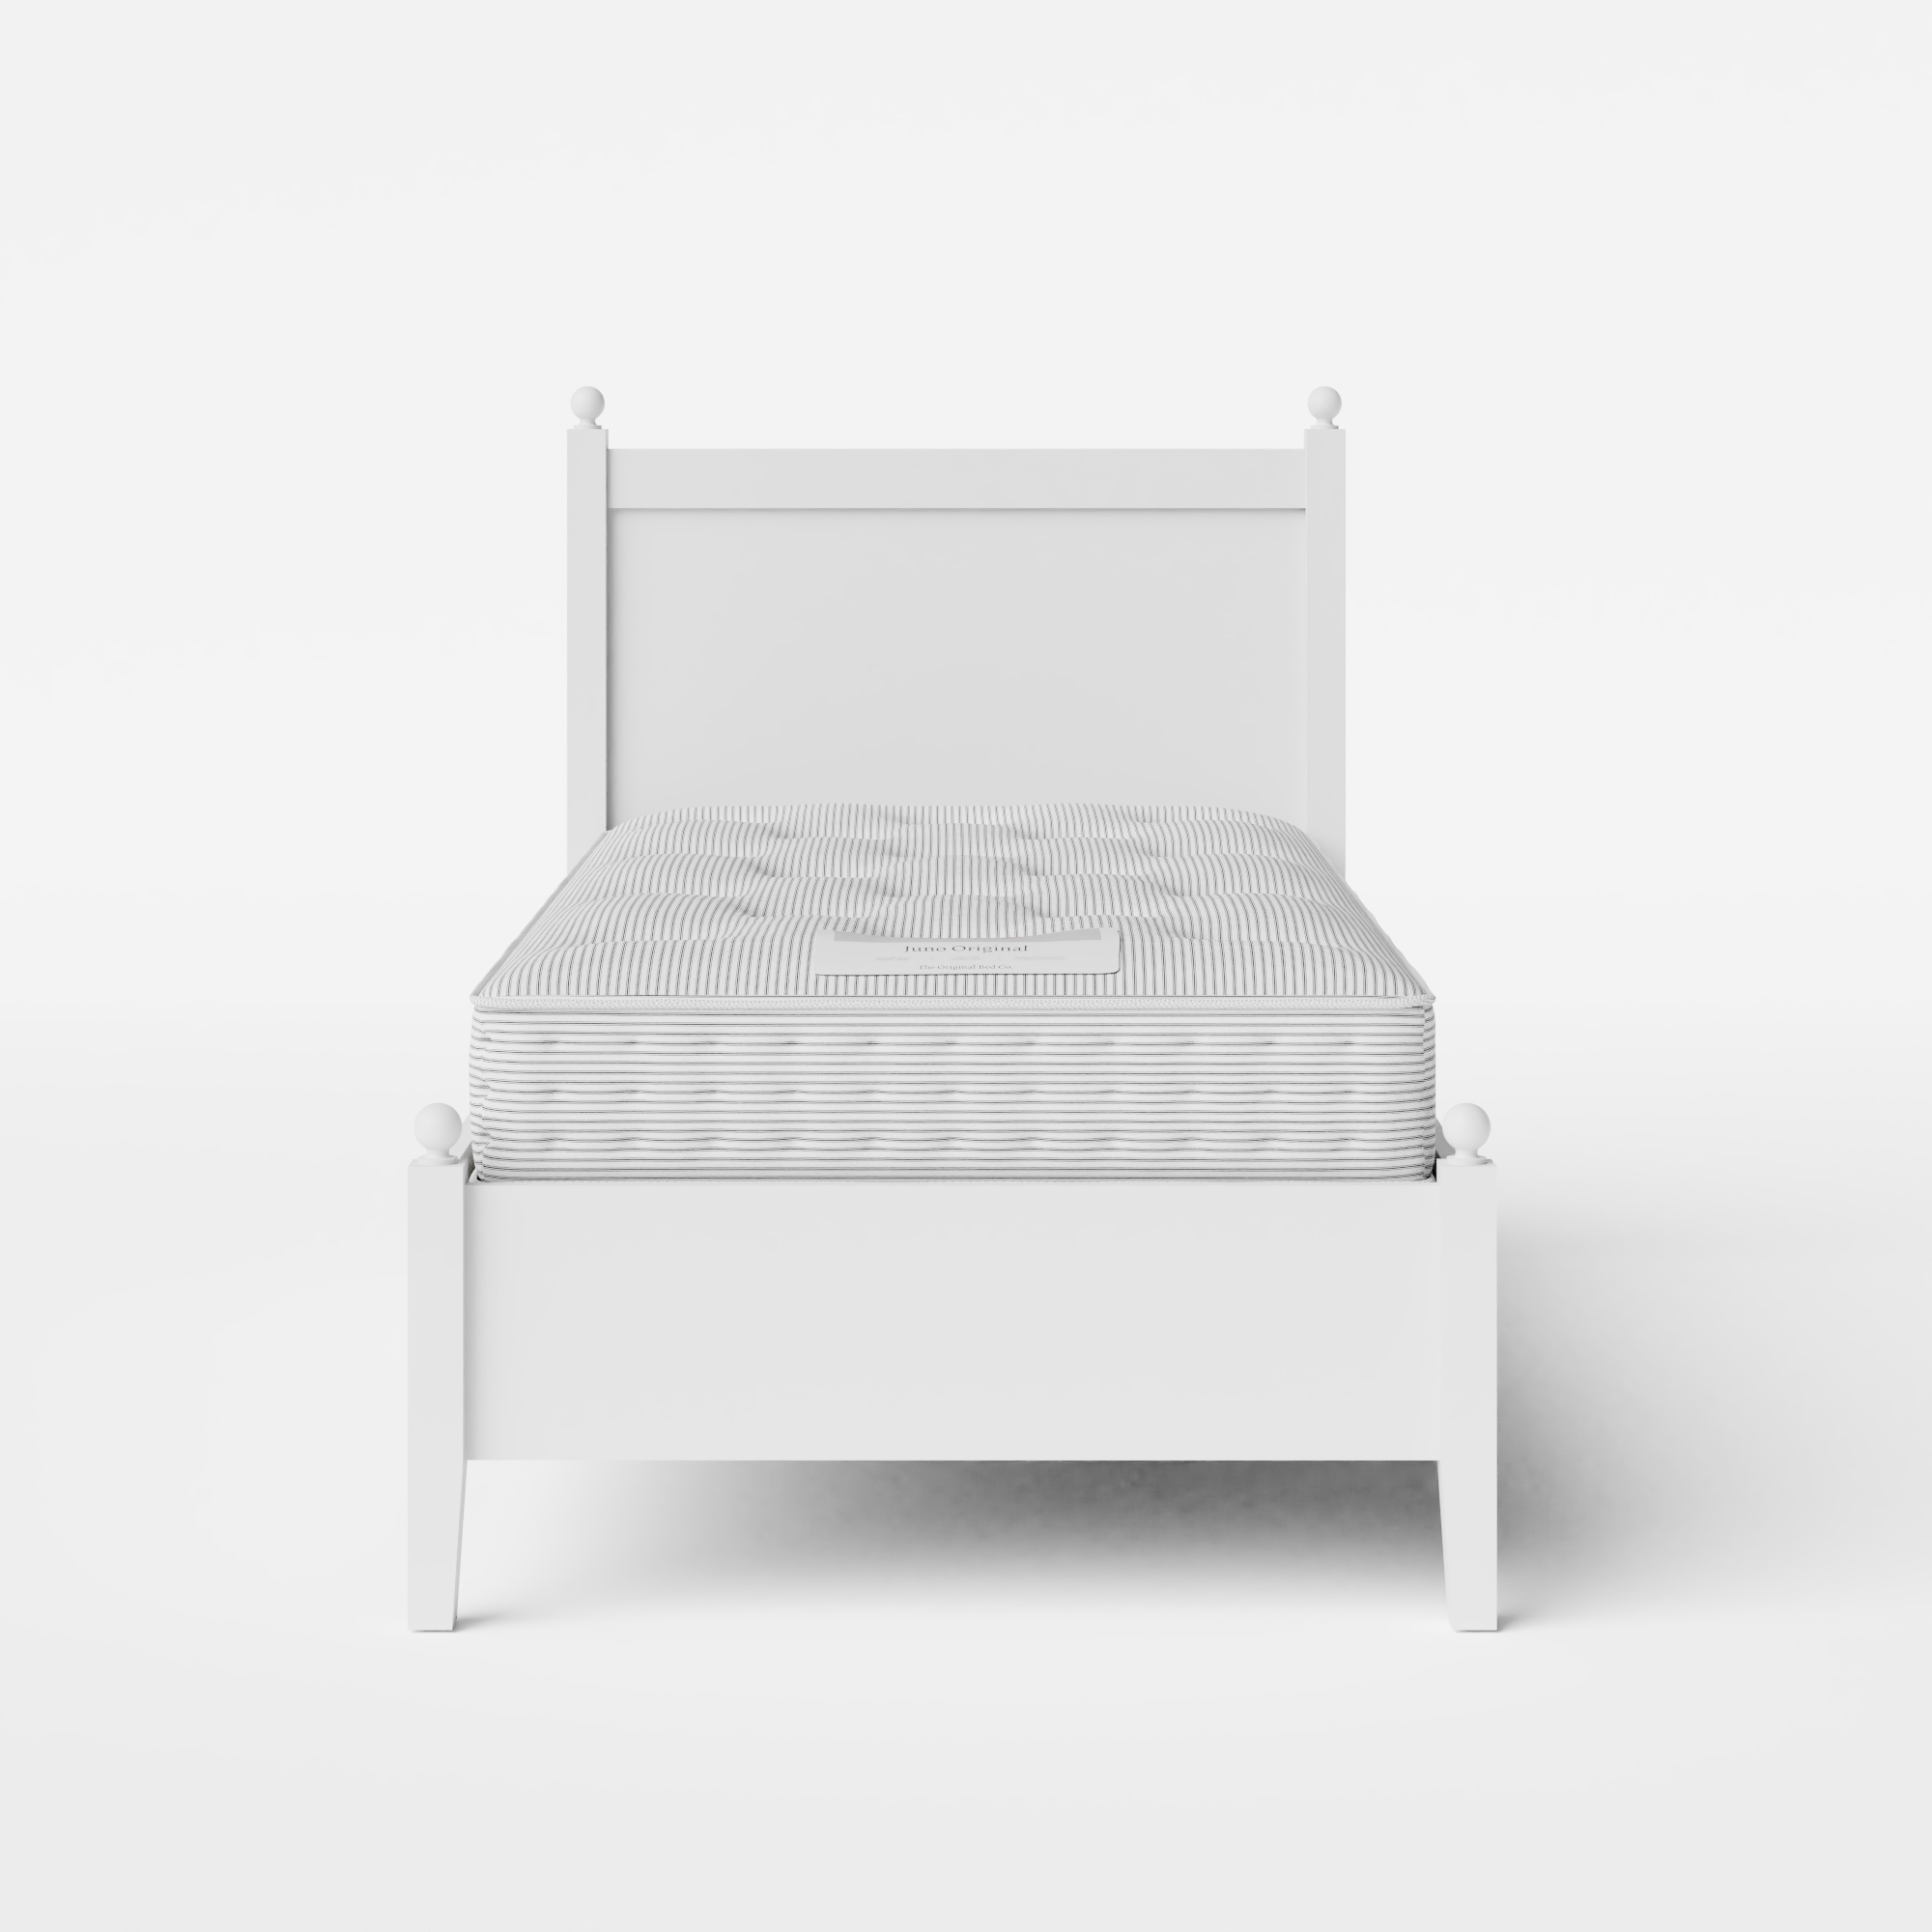 Marbella Low Footend Painted single painted wood bed in white with Juno mattress